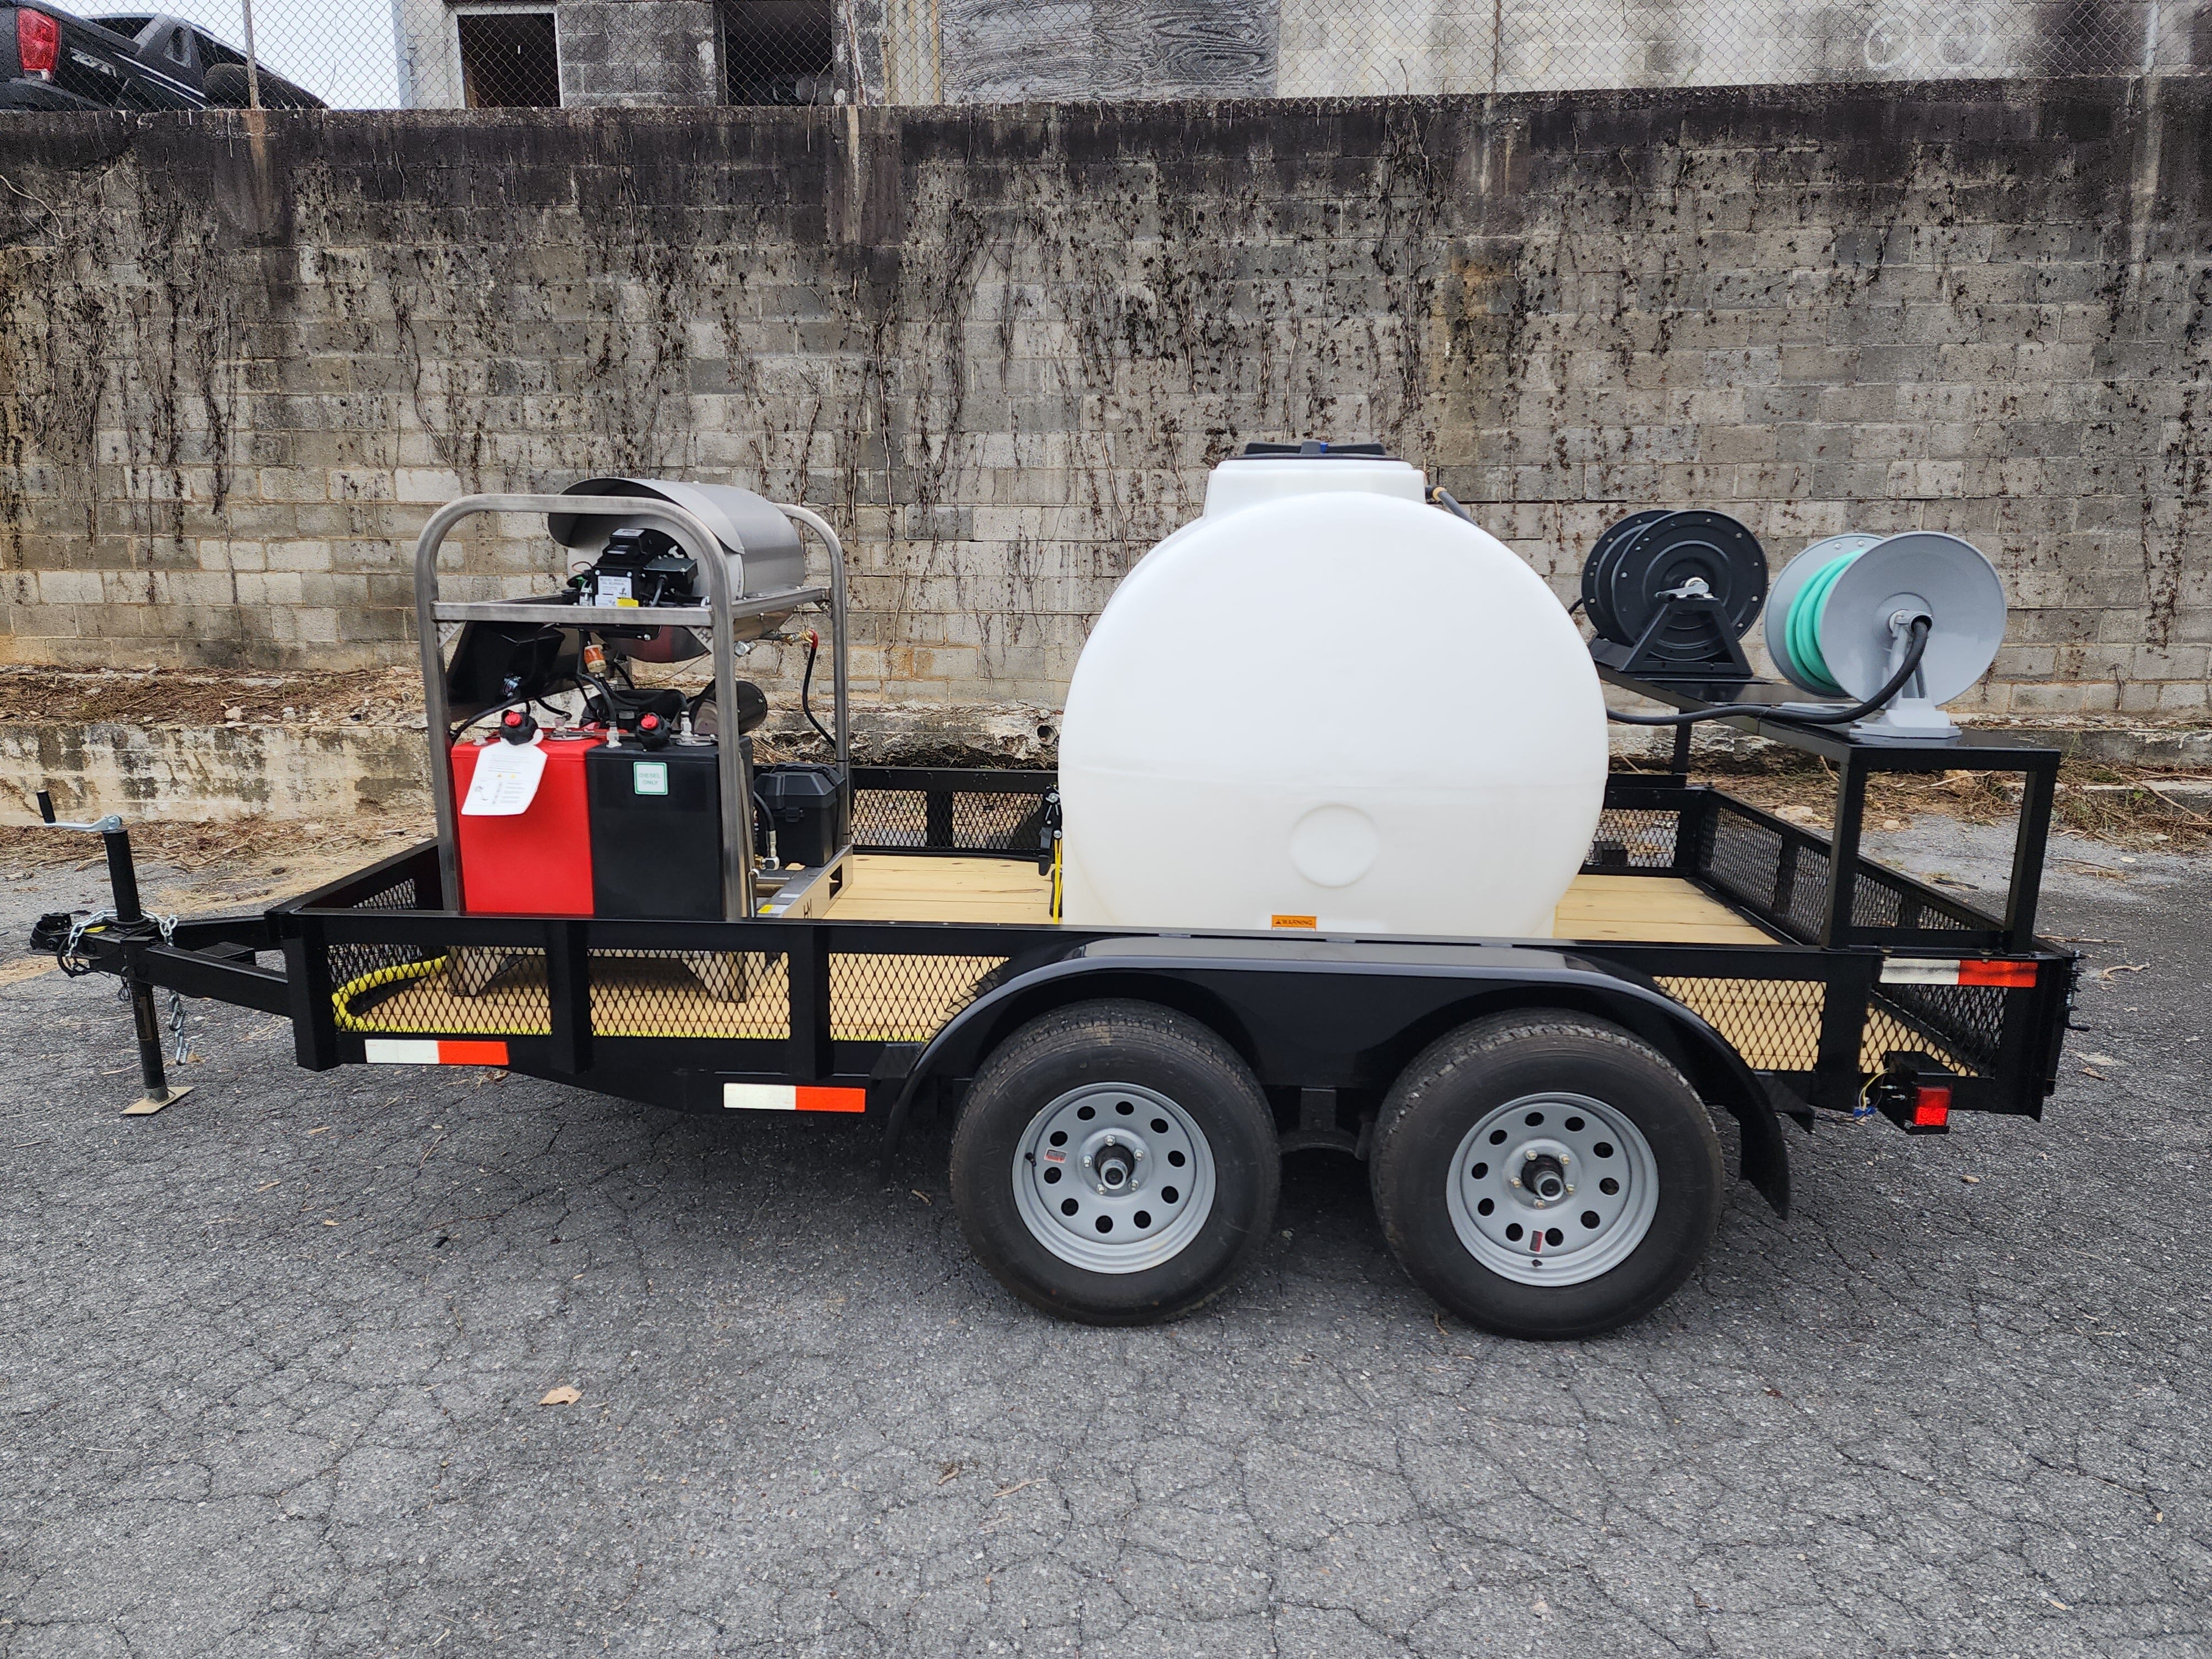 Hydro Max -8gpm at 3000psi Hot Water Trailer Package -SS Unit Pressure Washer Trailer Package BCE Cleaning Systems 